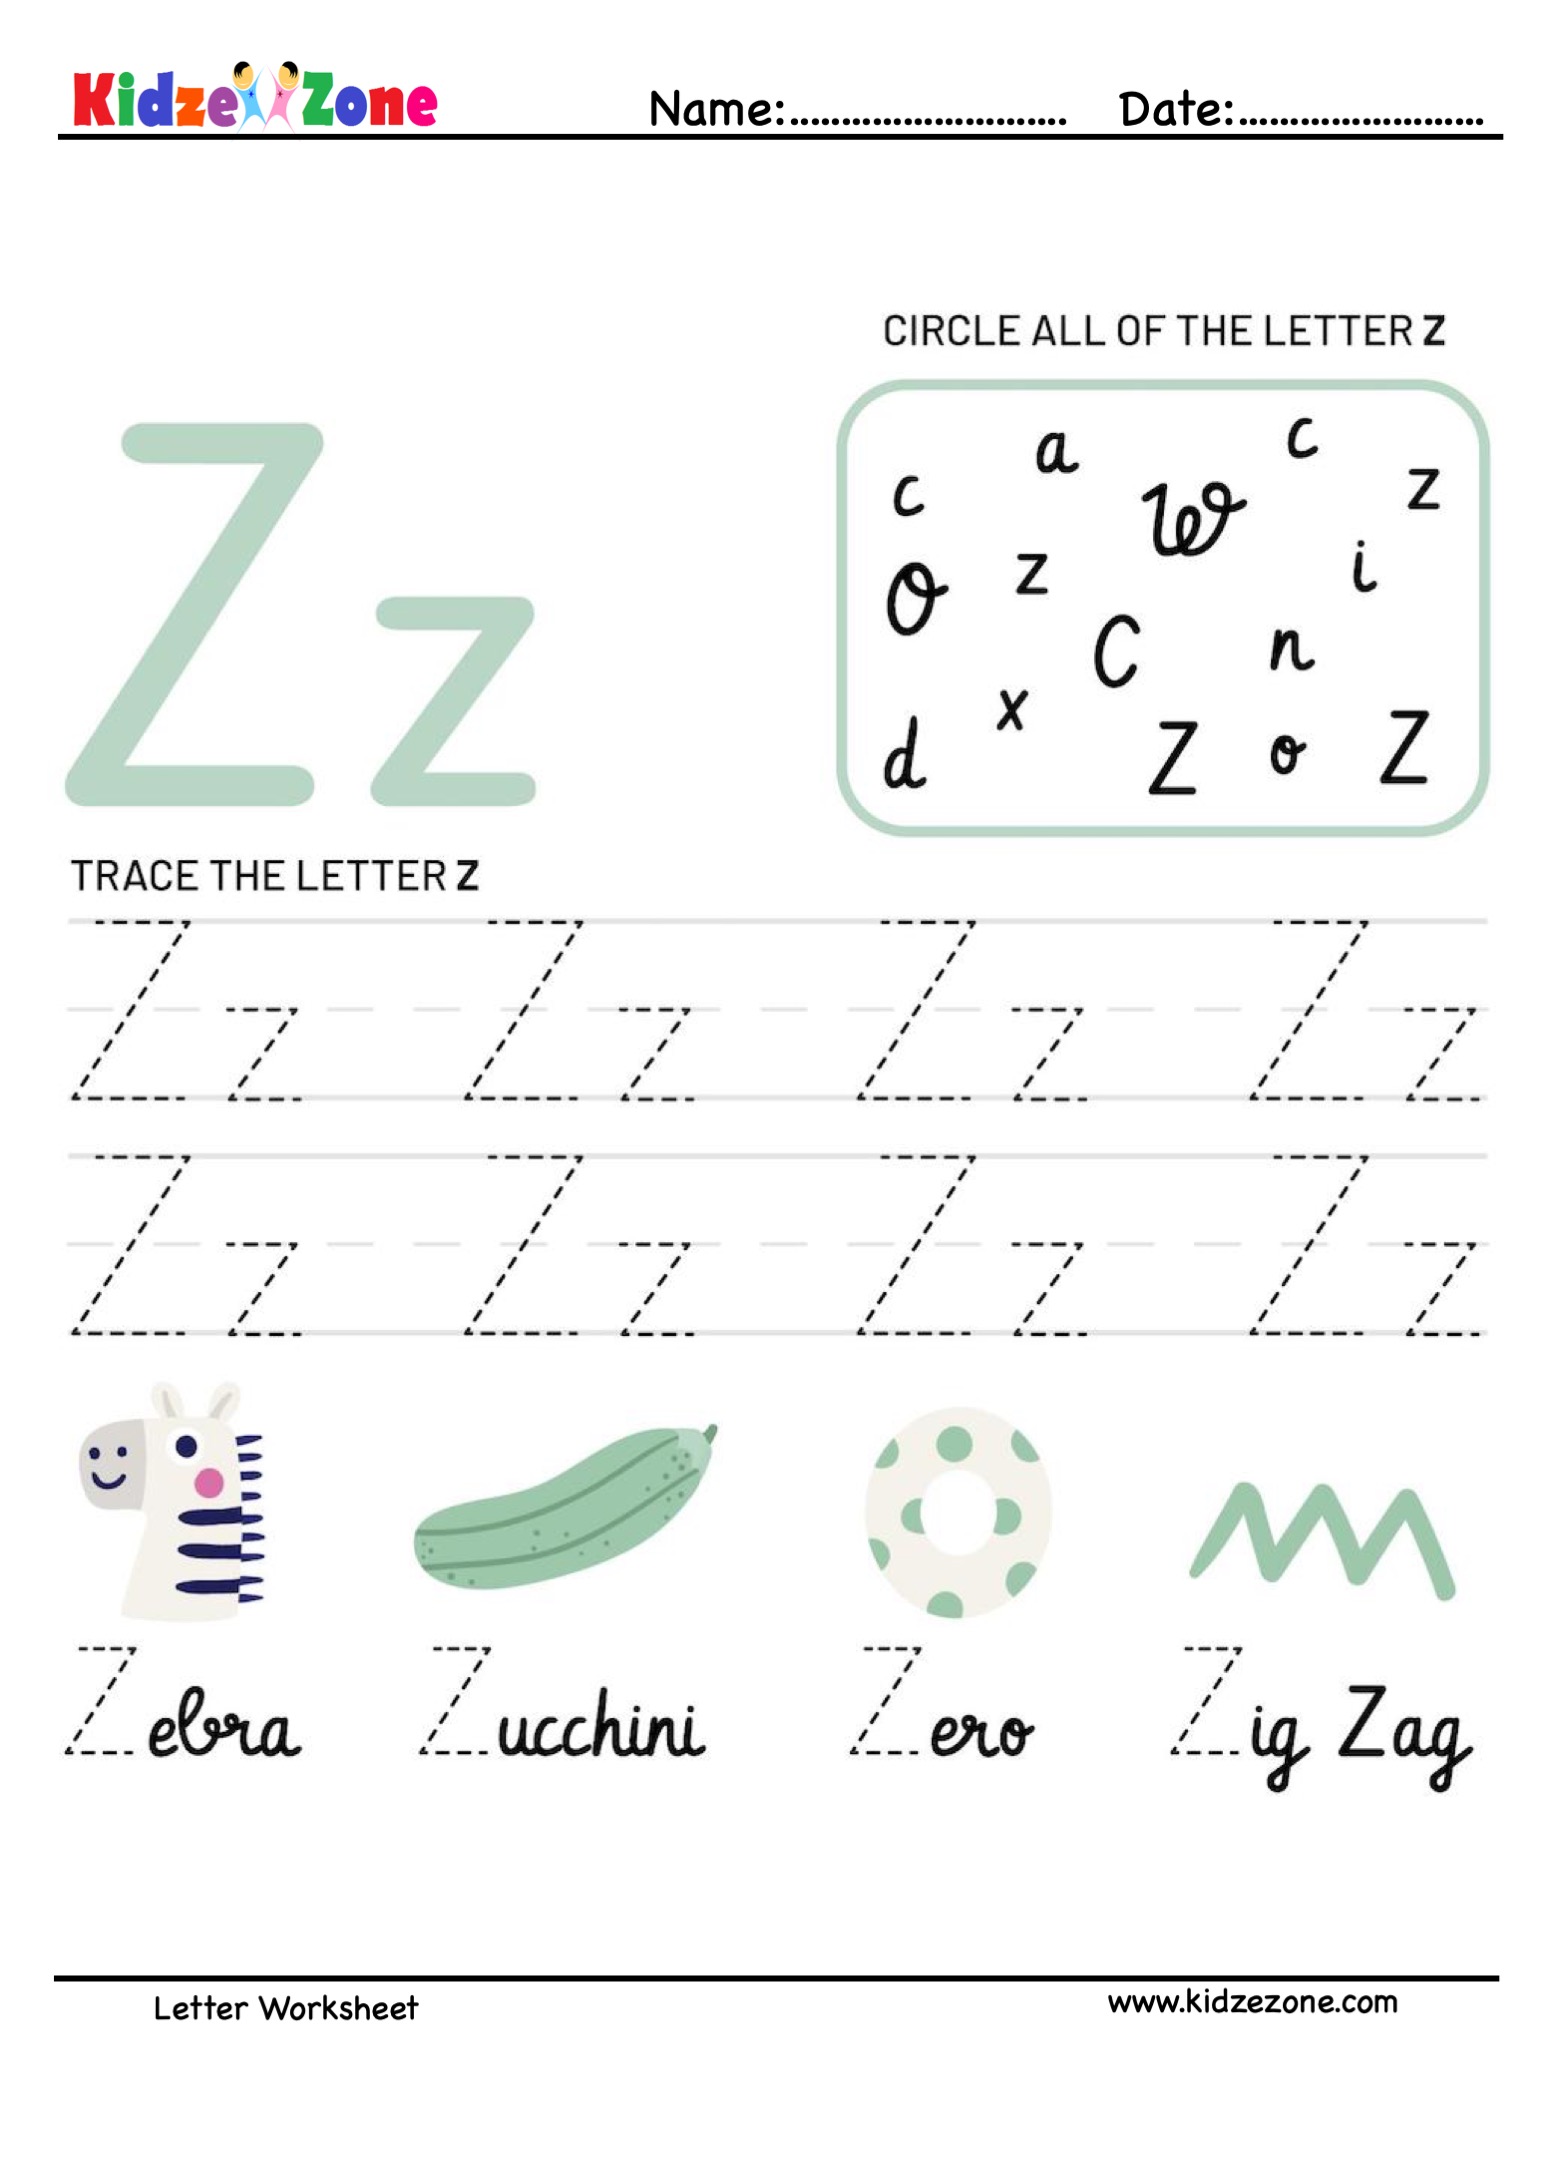 letter-z-tracing-and-fun-worksheet-kidzezone